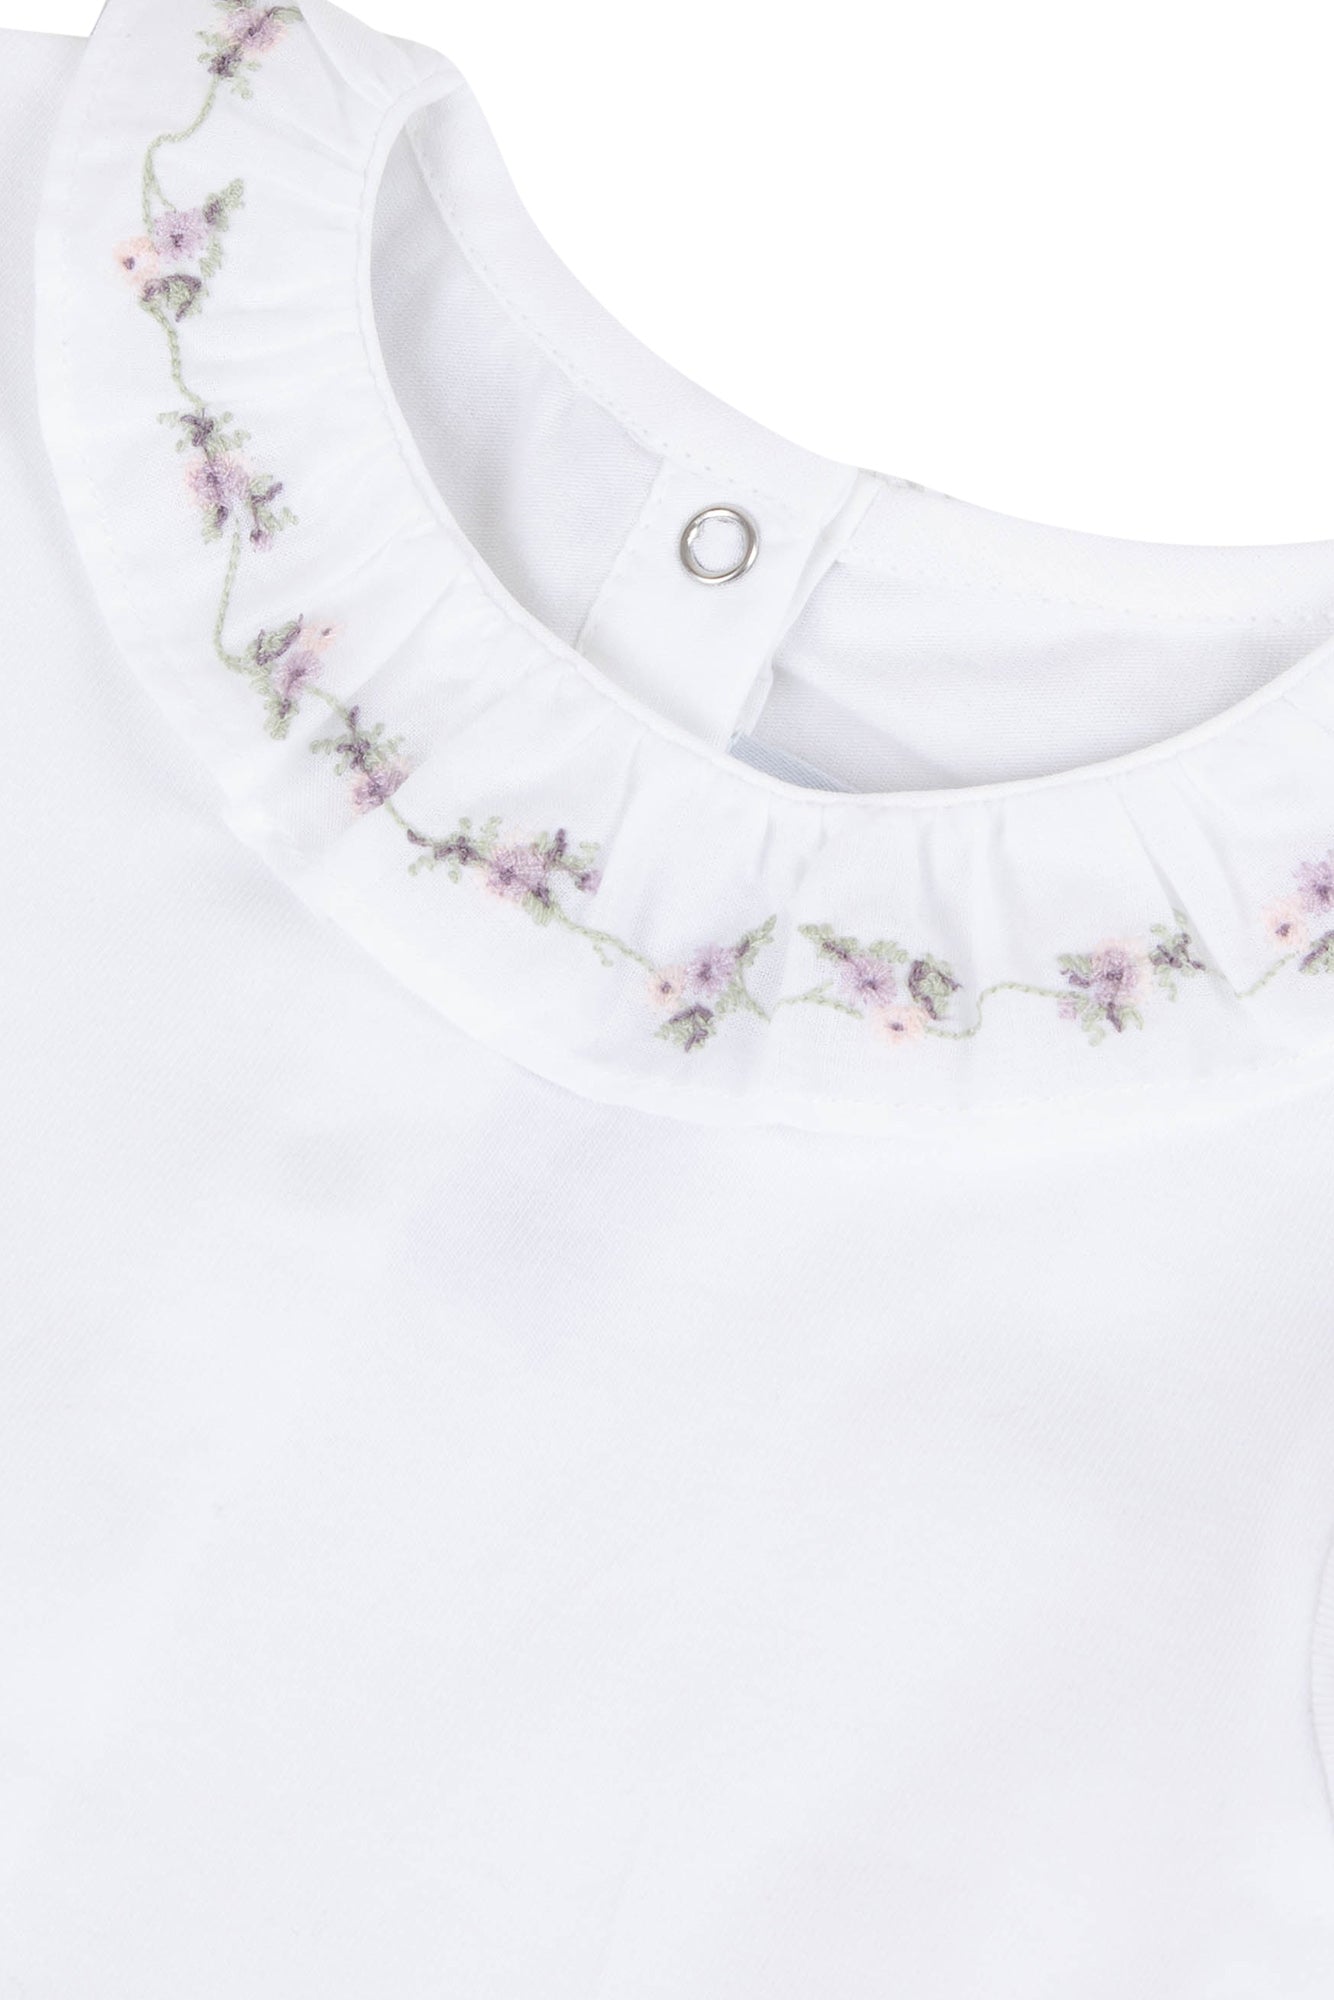 Bodysuit - White jersey with floral embroidered collar - Tartine Et Chocolat